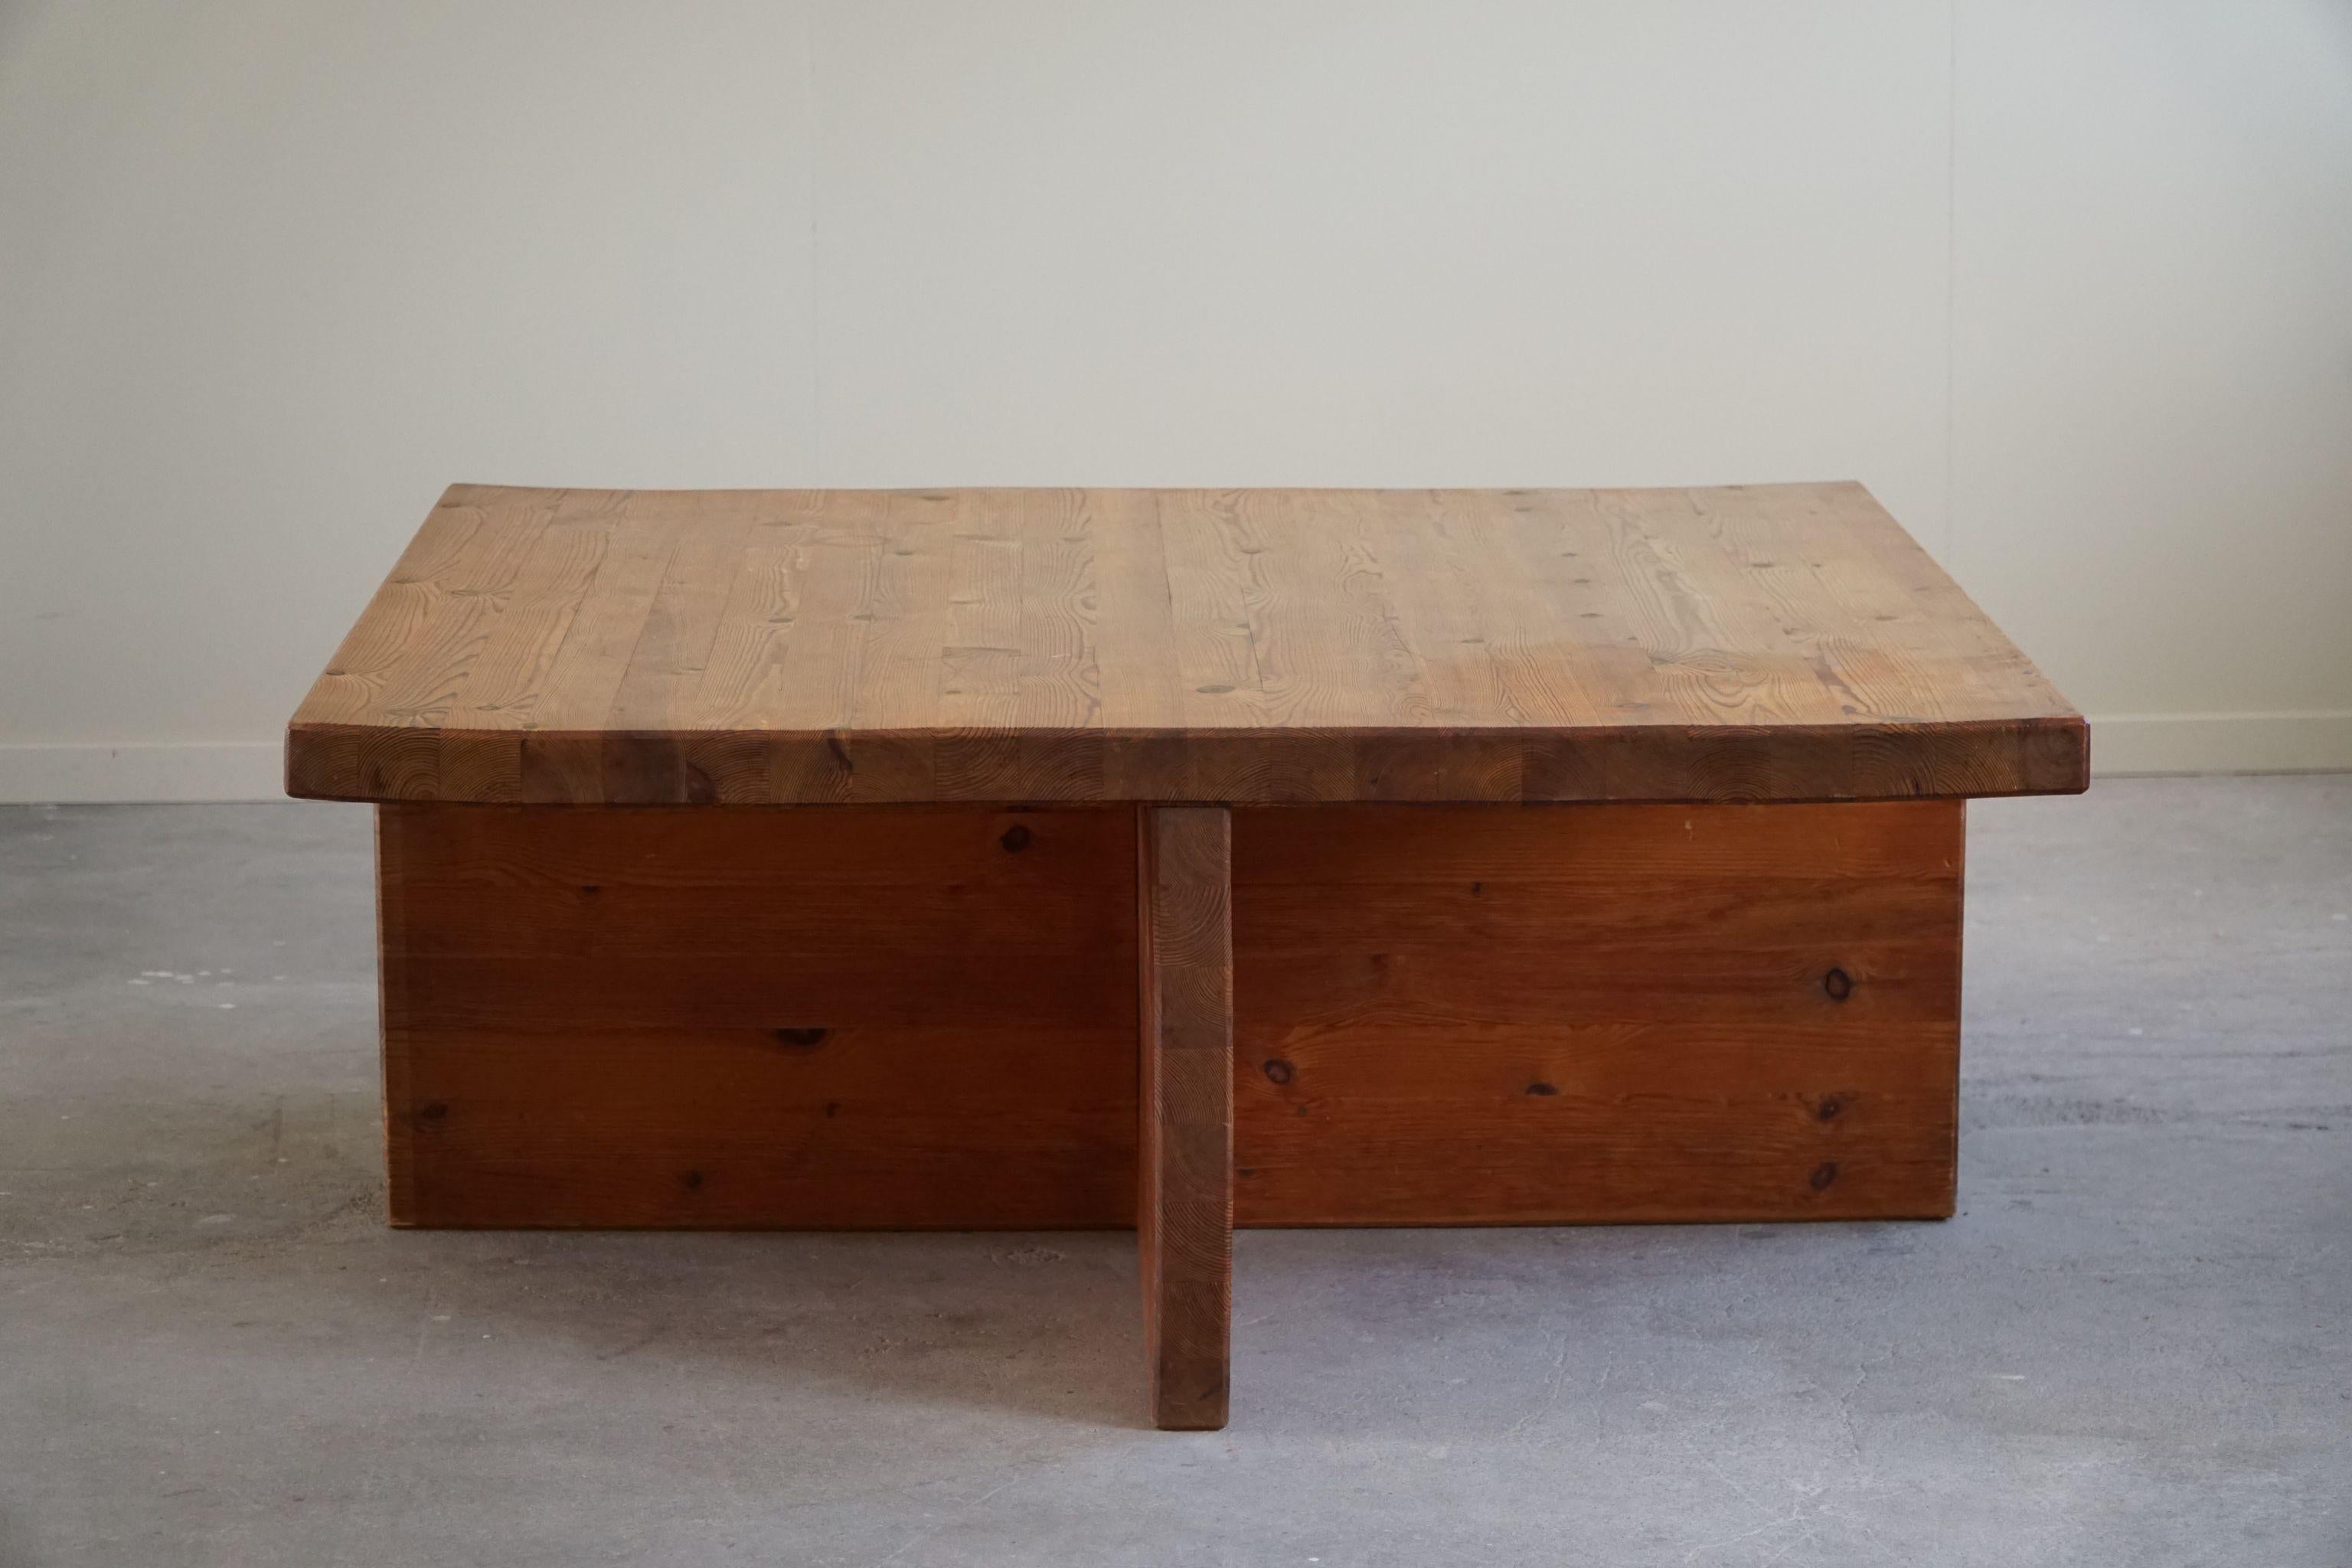 20th Century Swedish Modern Solid Pine Coffee Table by Sven Larsson, Brutalist, 1970s For Sale